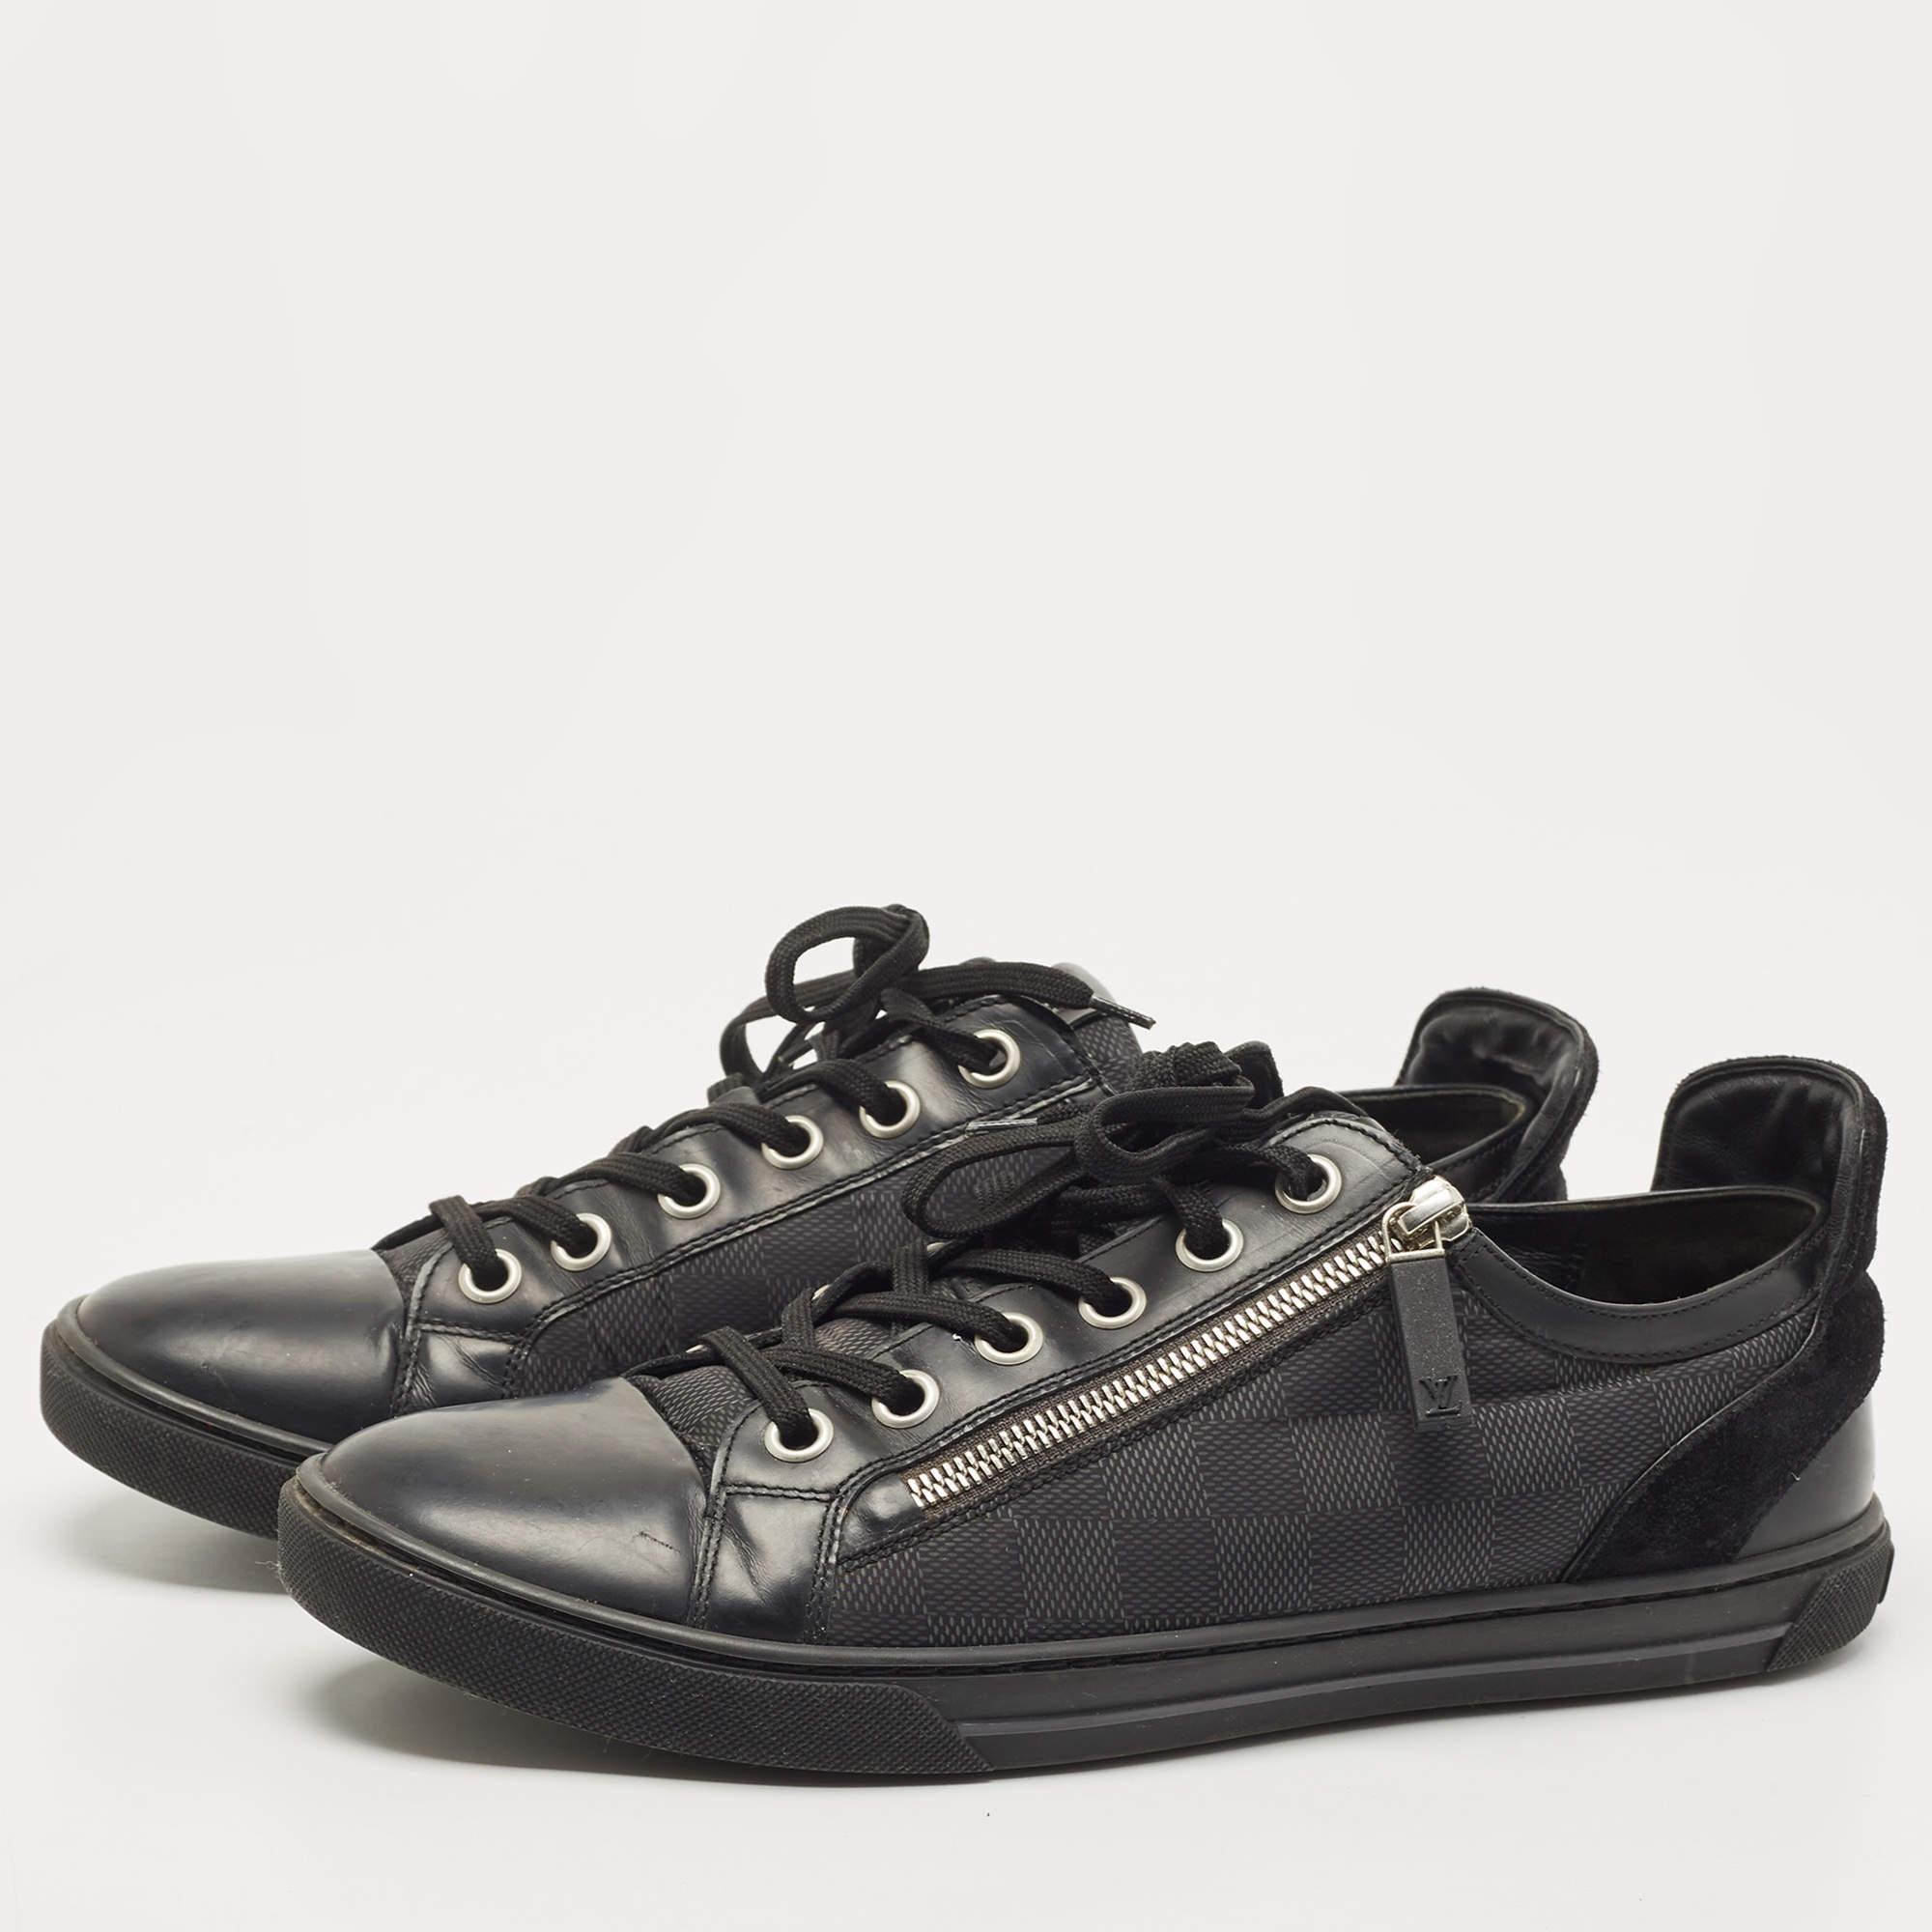 Louis Vuitton Black Leather and Damier Ebene Canvas Low Top Sneakers Size 42.5 For Sale 3